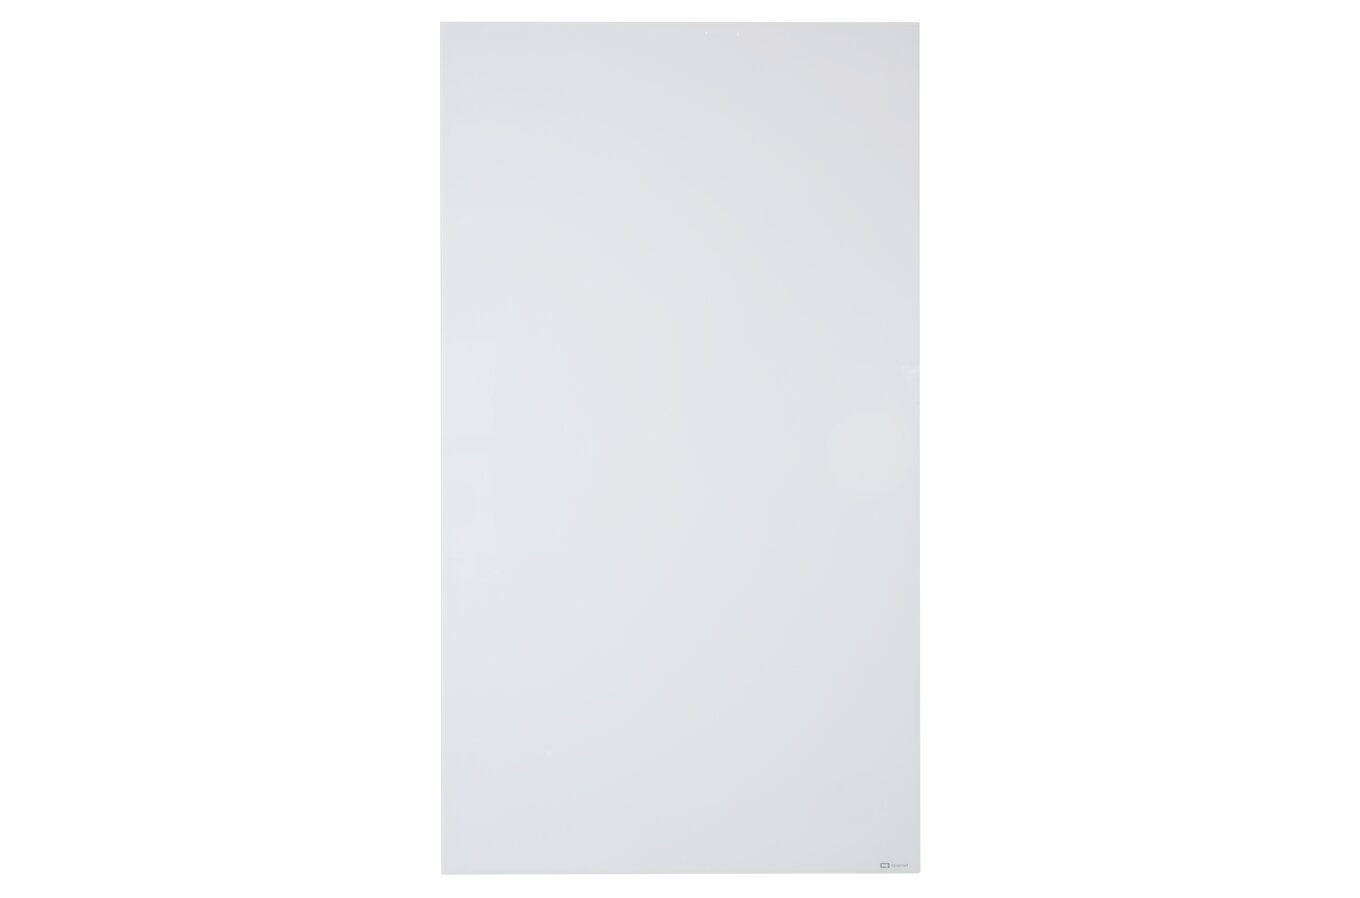 TSJ OFFICE Glass Dry-Erase Board - 36 x 24 Inches Wall Mounted Glass  Magnetic Whiteboard, Large Frameless Glass White Board for Office, Home &  School